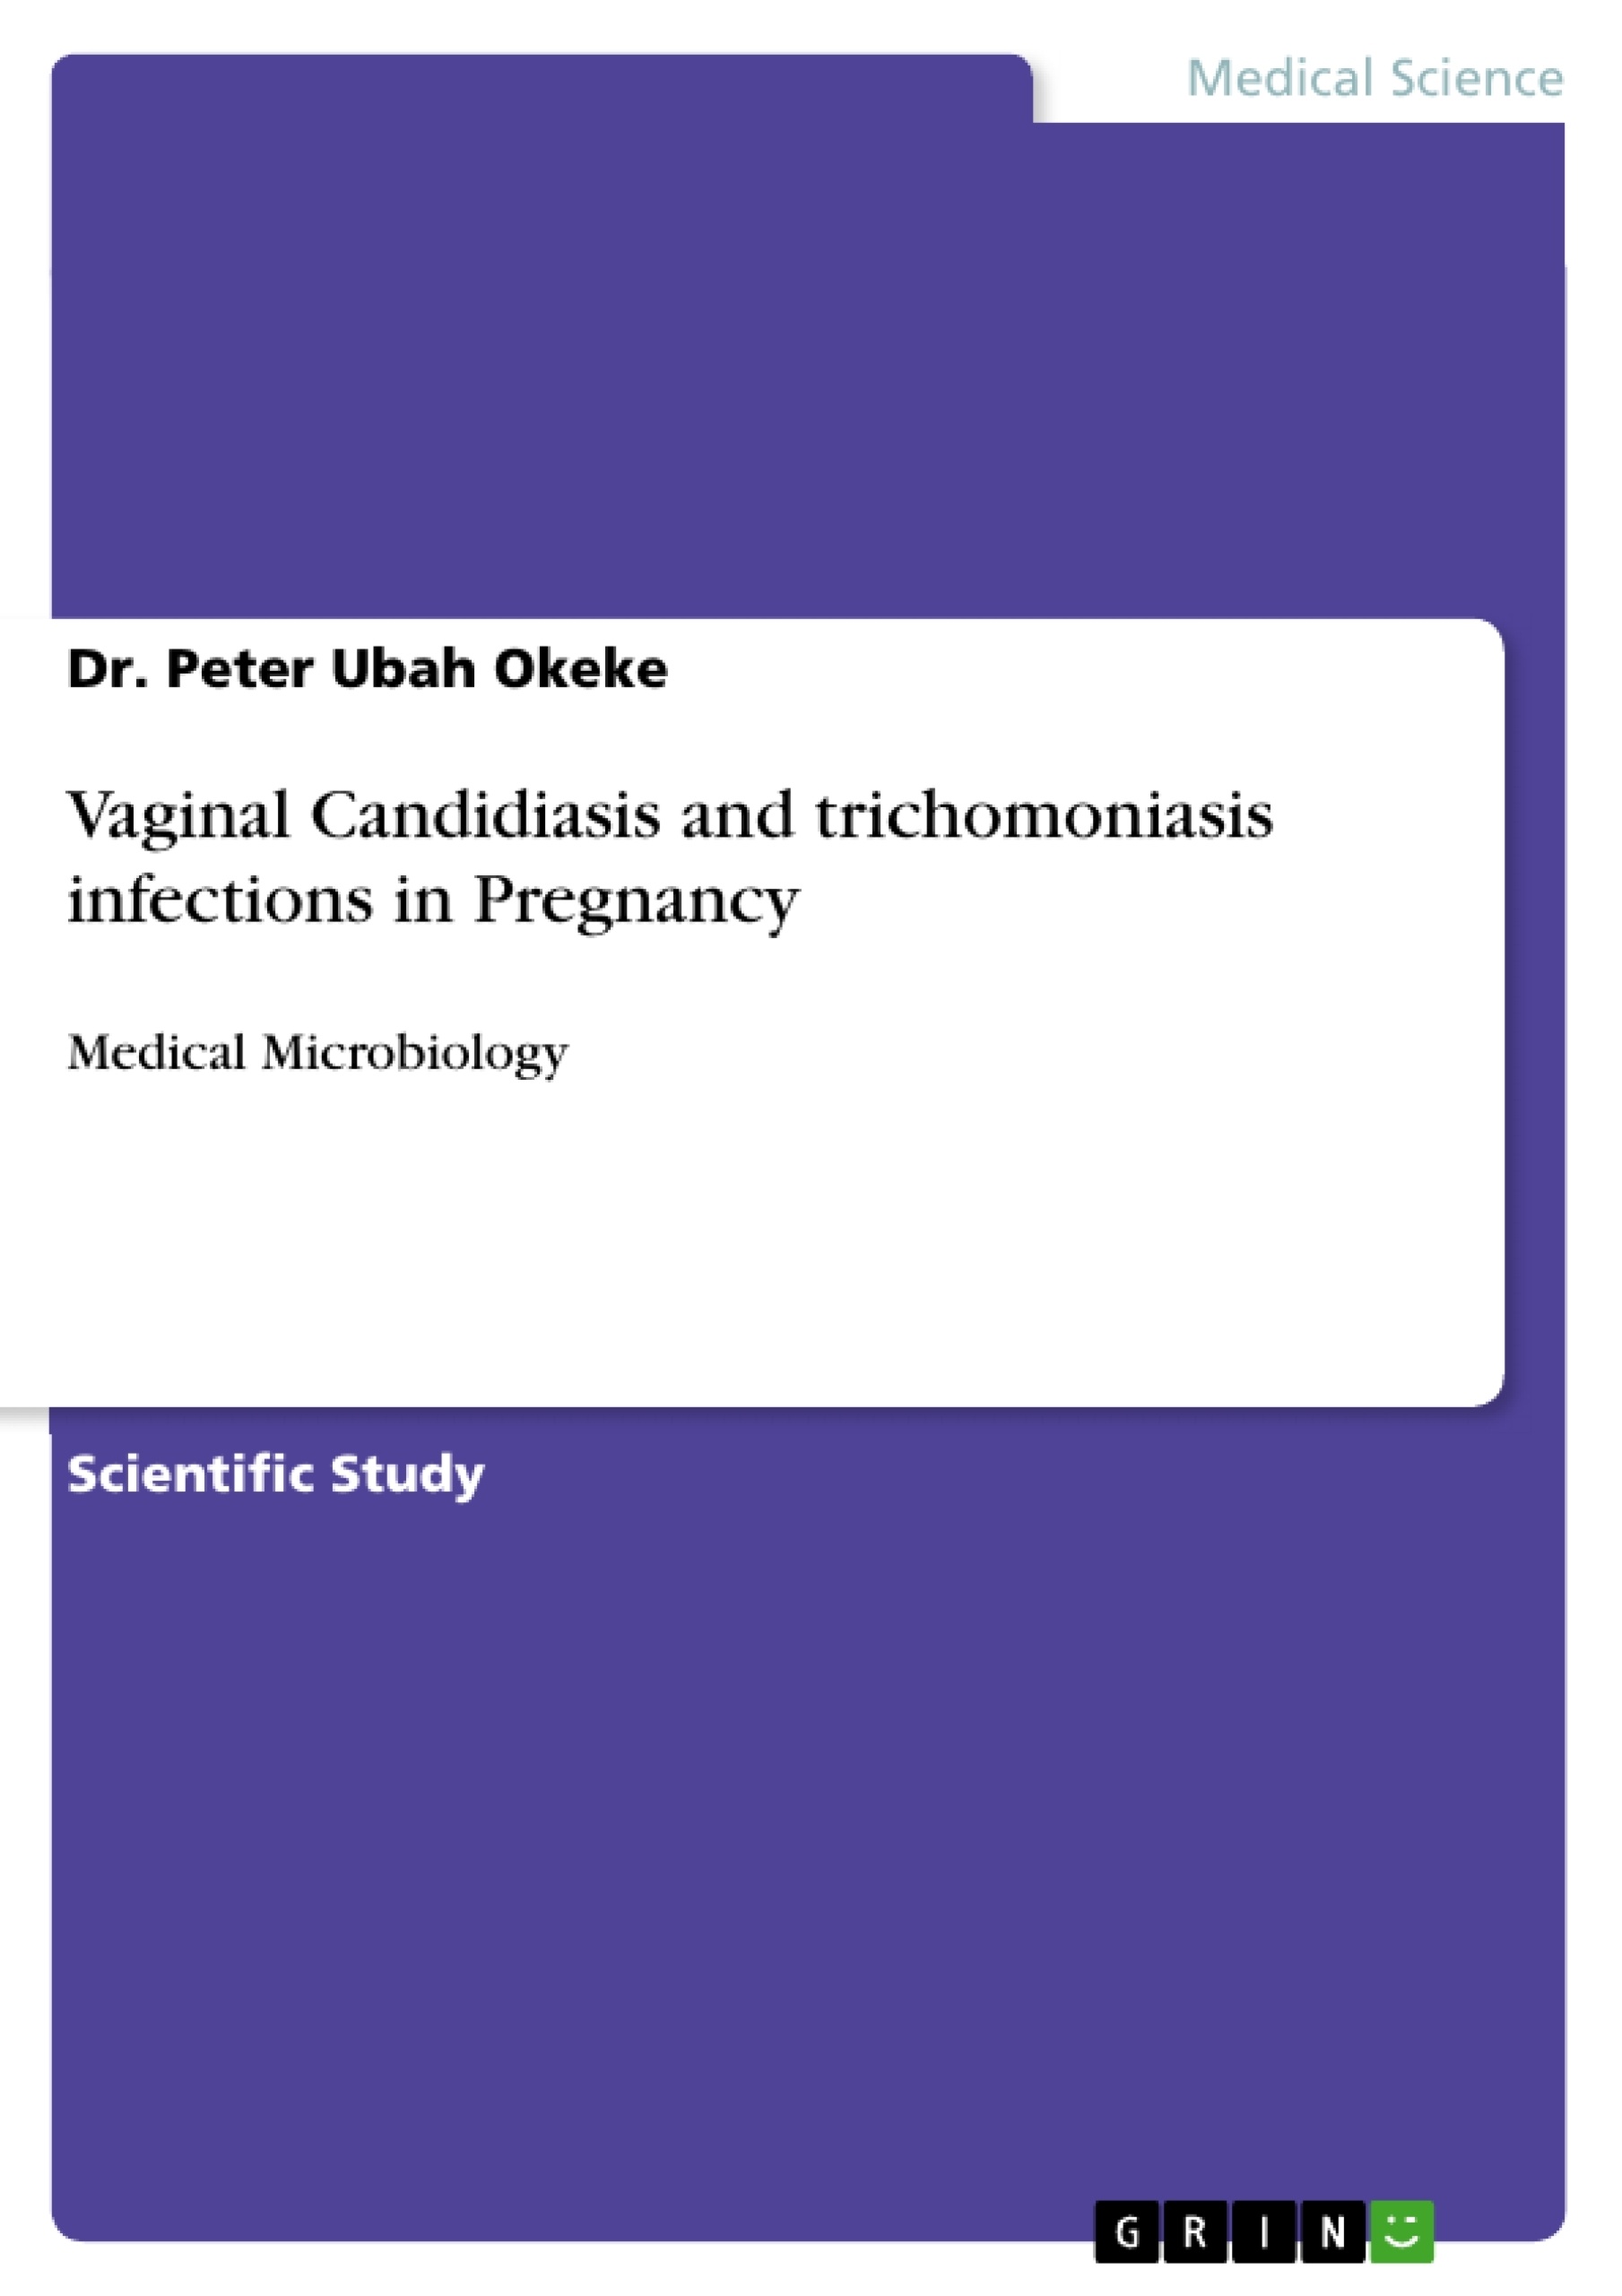 Titel: Vaginal Candidiasis and trichomoniasis infections in Pregnancy